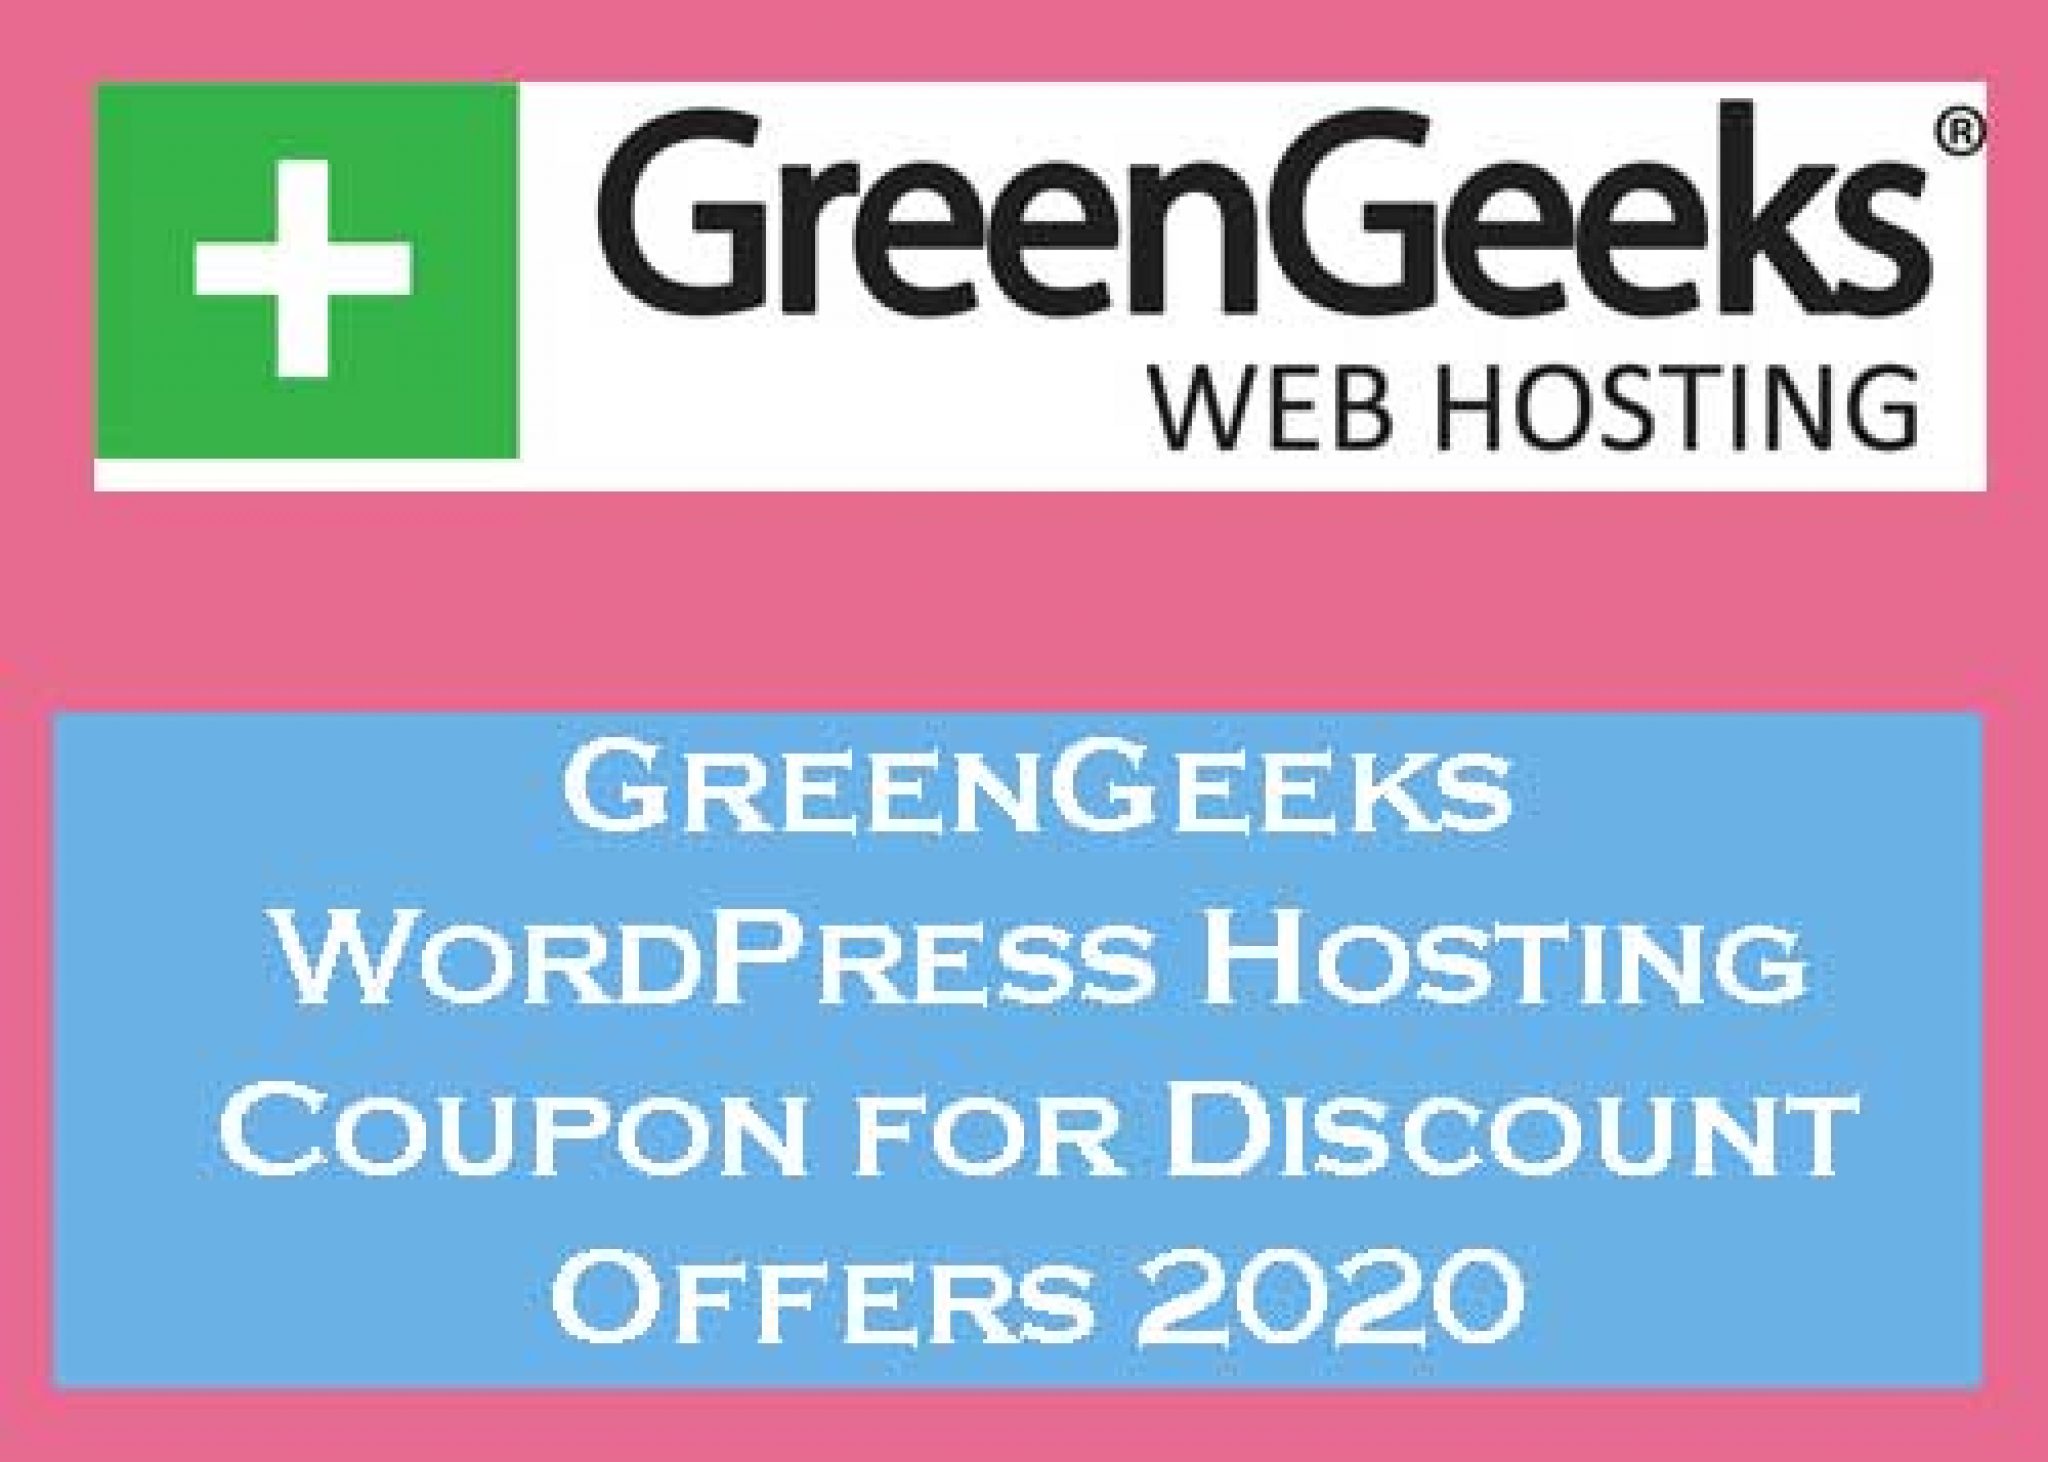 GreenGeeks WordPress Hosting Coupon For Discount Offers 2020 2048x1462 